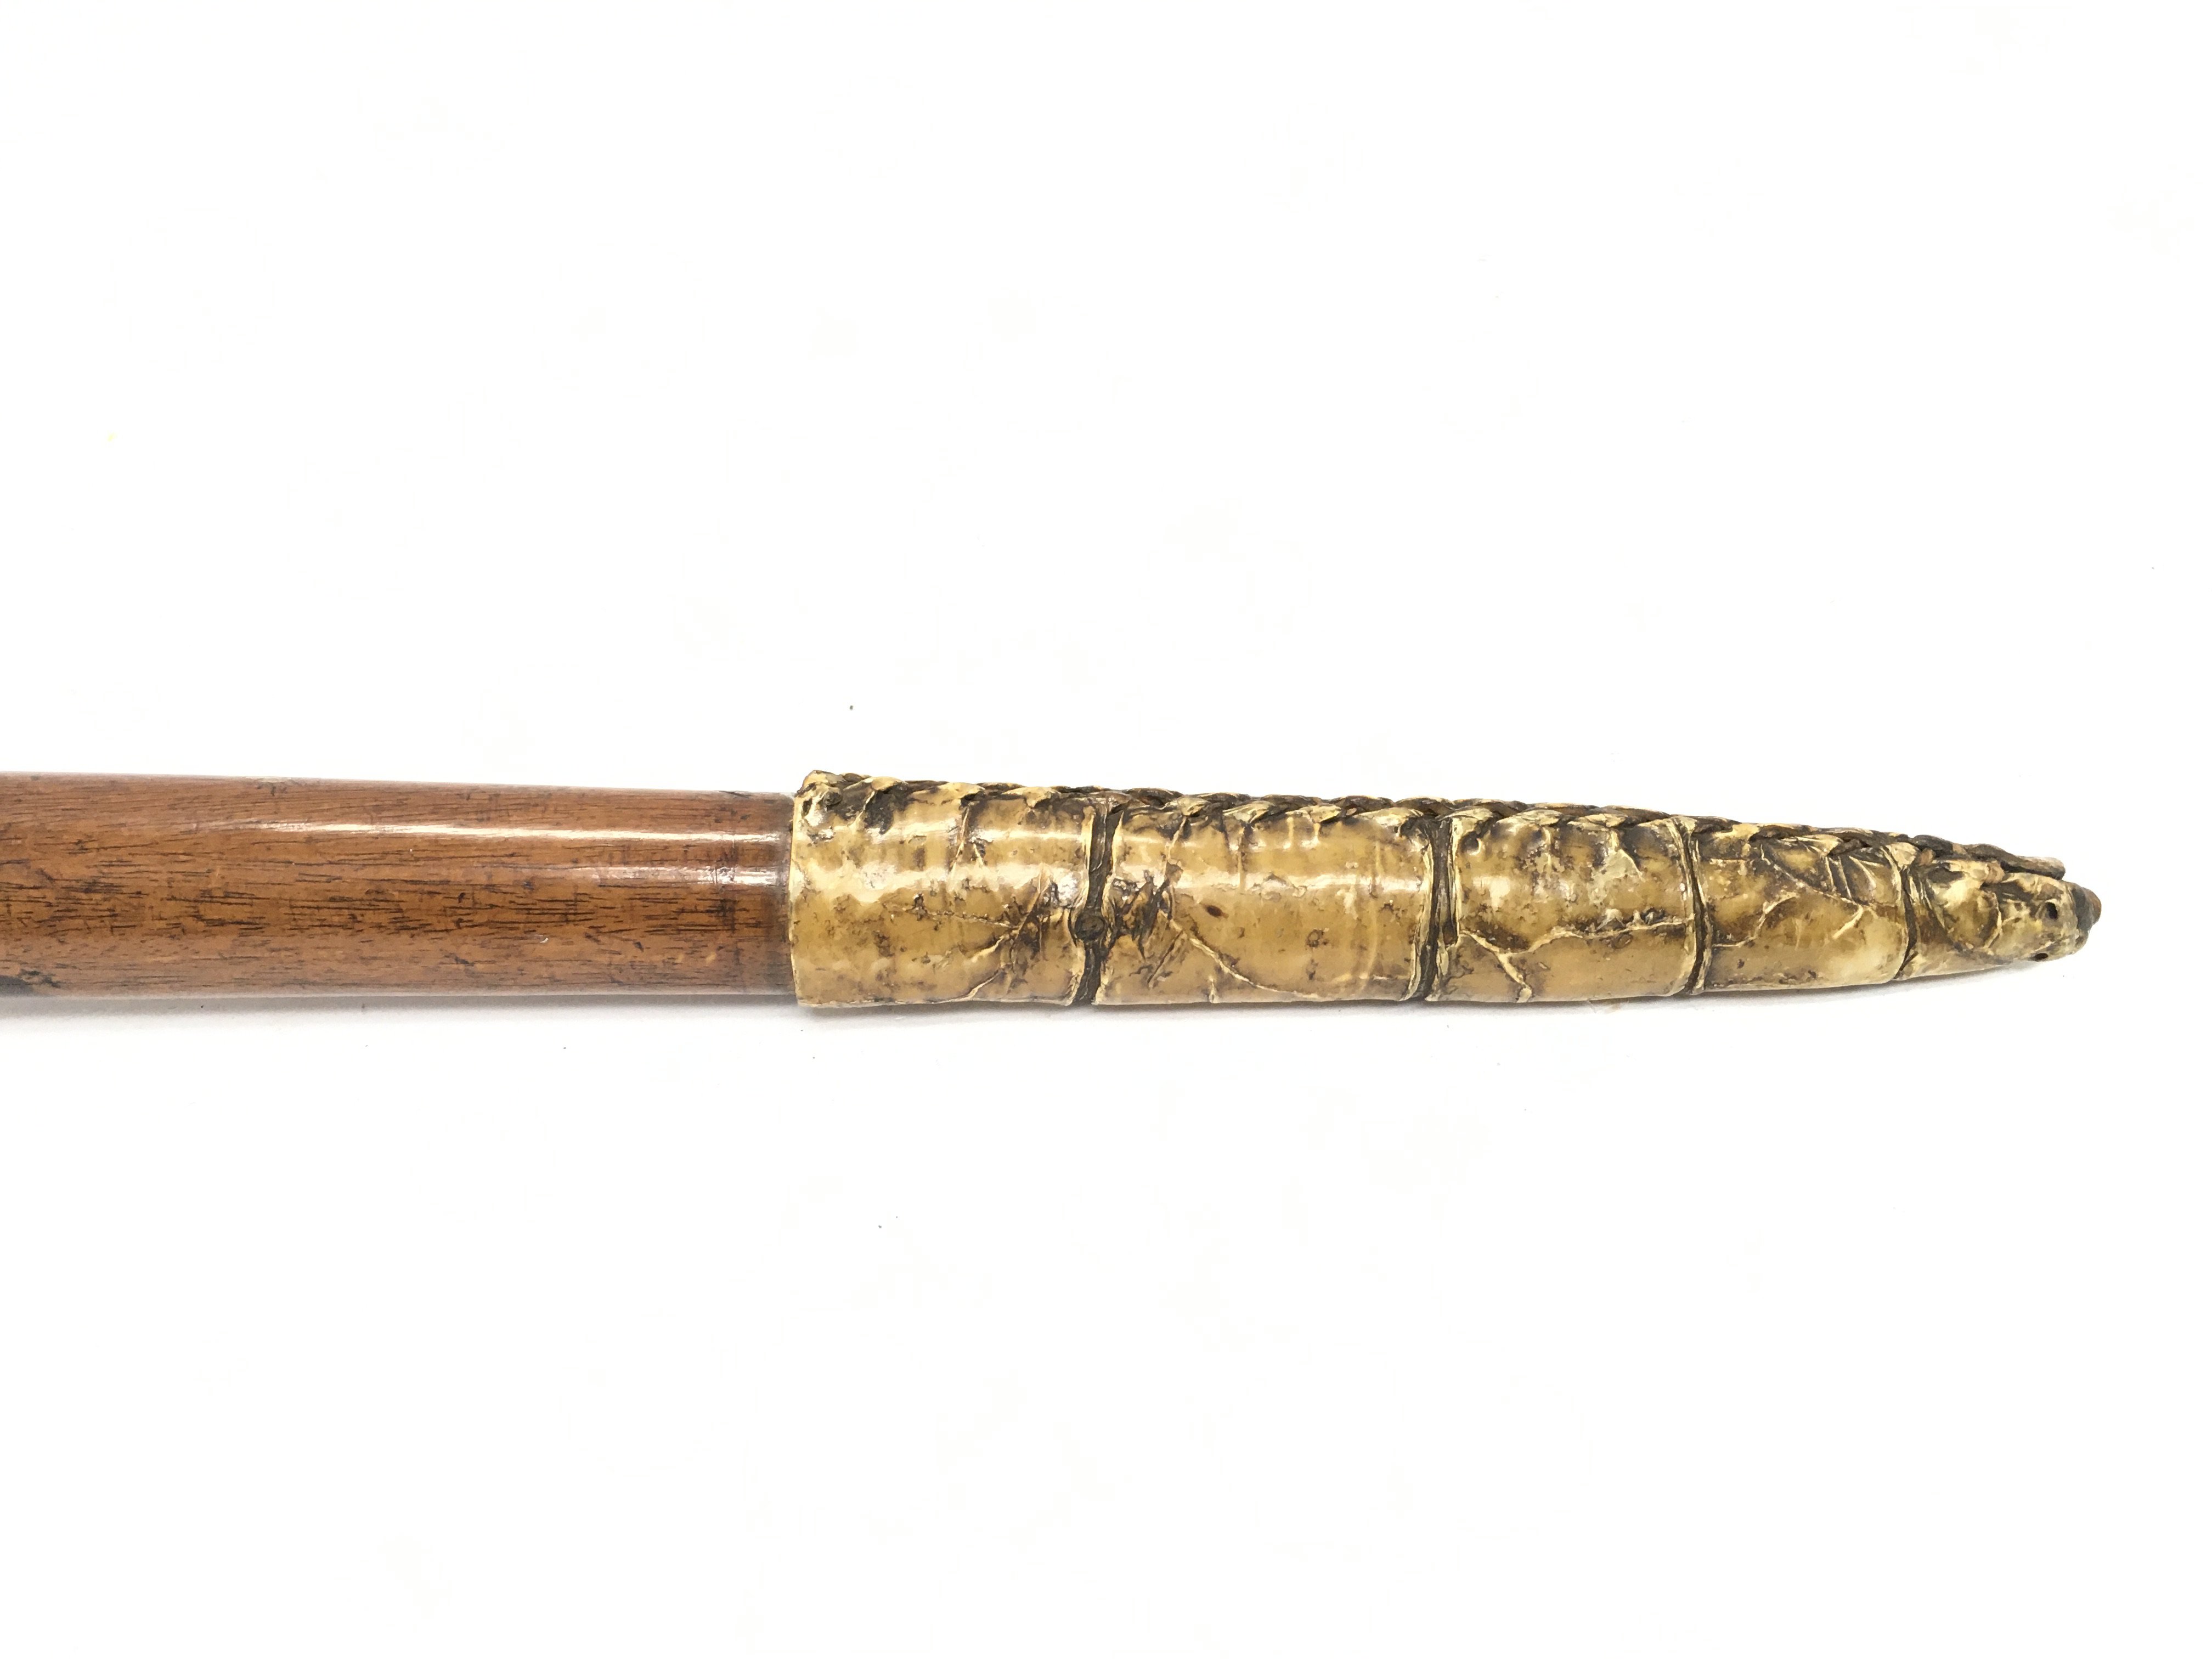 An unusual knobkerrie possible from circa 19th cen - Image 2 of 3